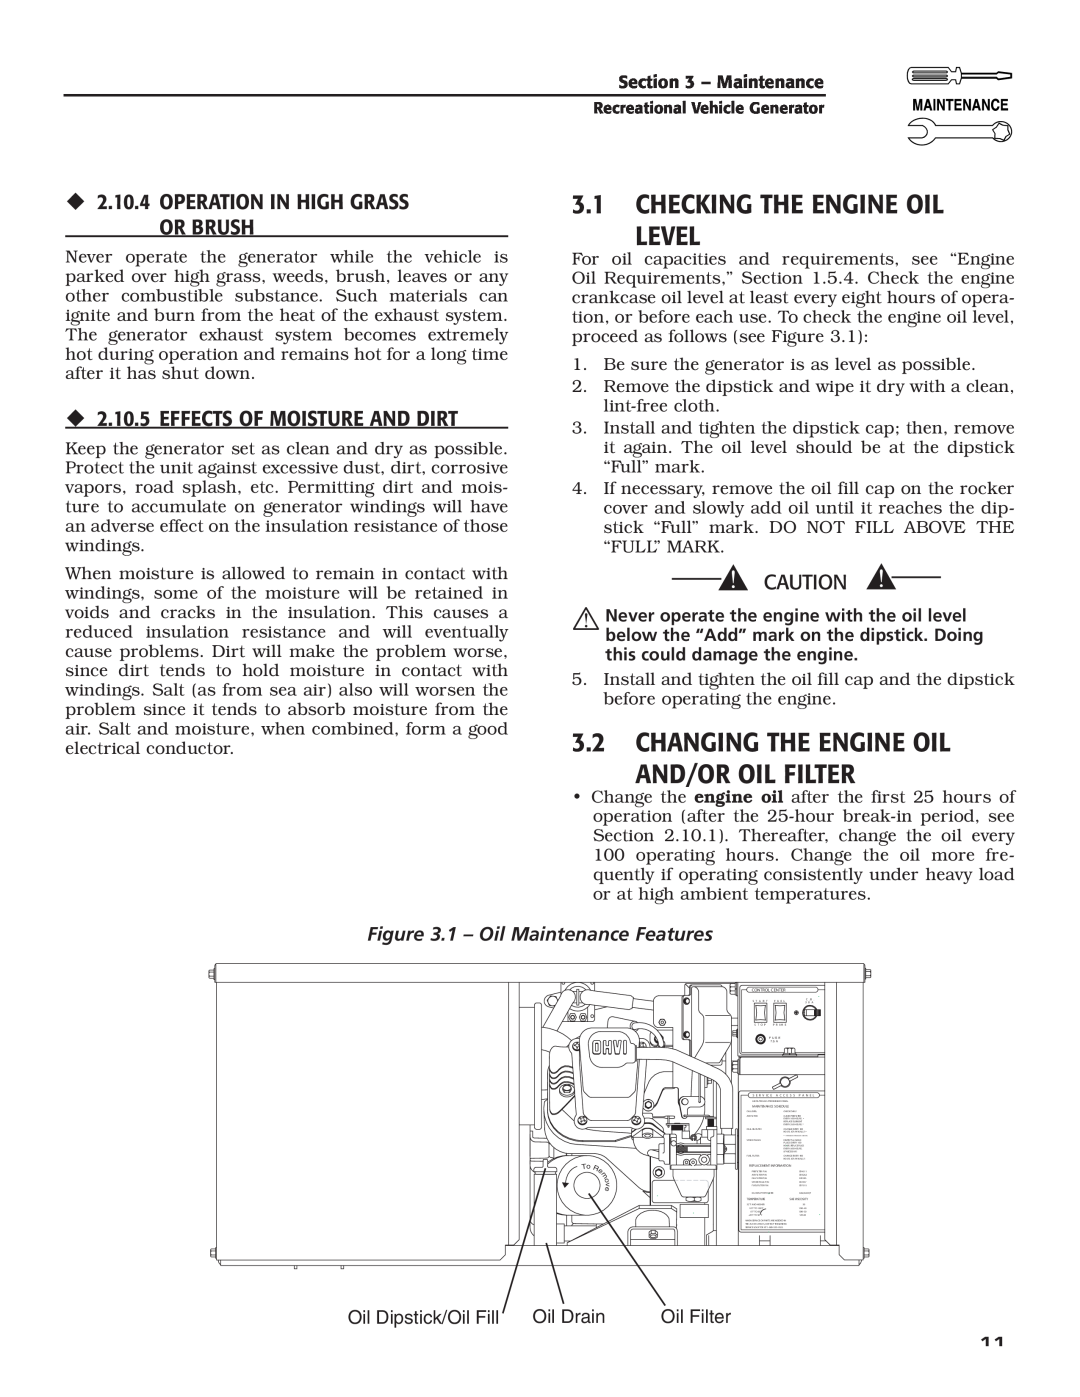 Generac Power Systems 004700-00 Checking The Engine Oil Level, Changing The Engine Oil And/Or Oil Filter, Oil Drain 